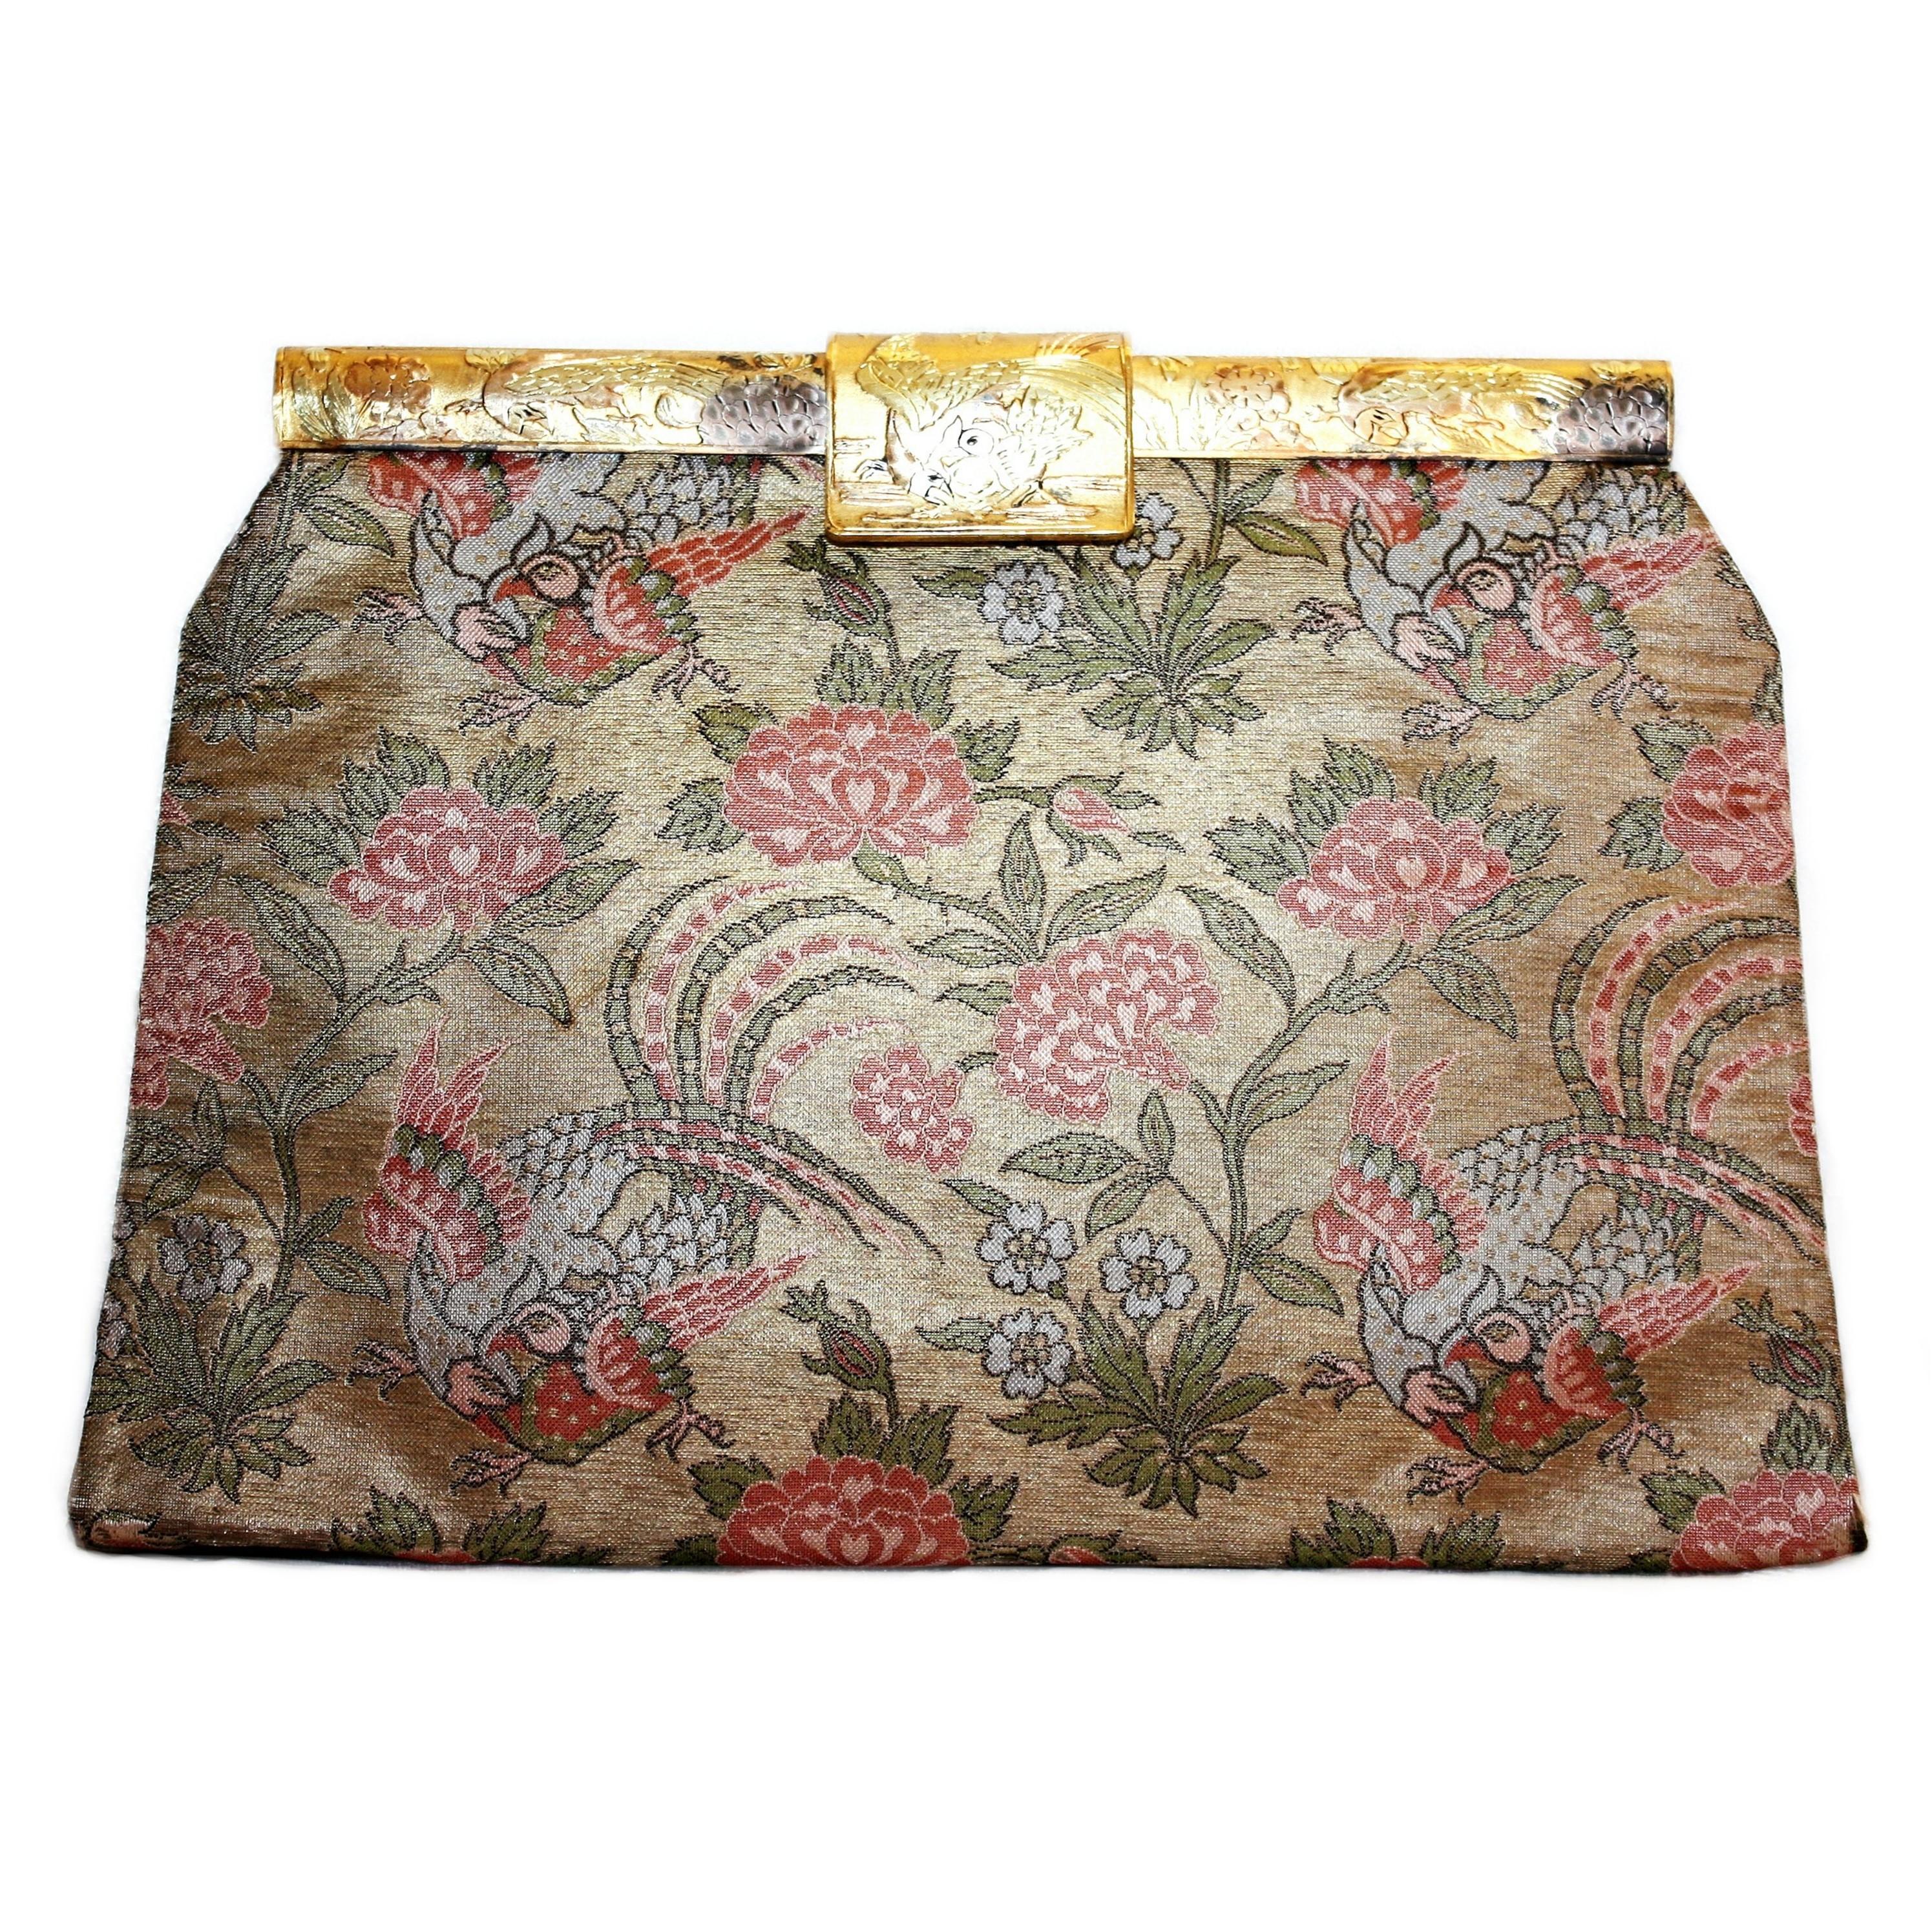 Circa 1930's French Bird Motif Brocade Purse with Matching Frame and Fabric For Sale